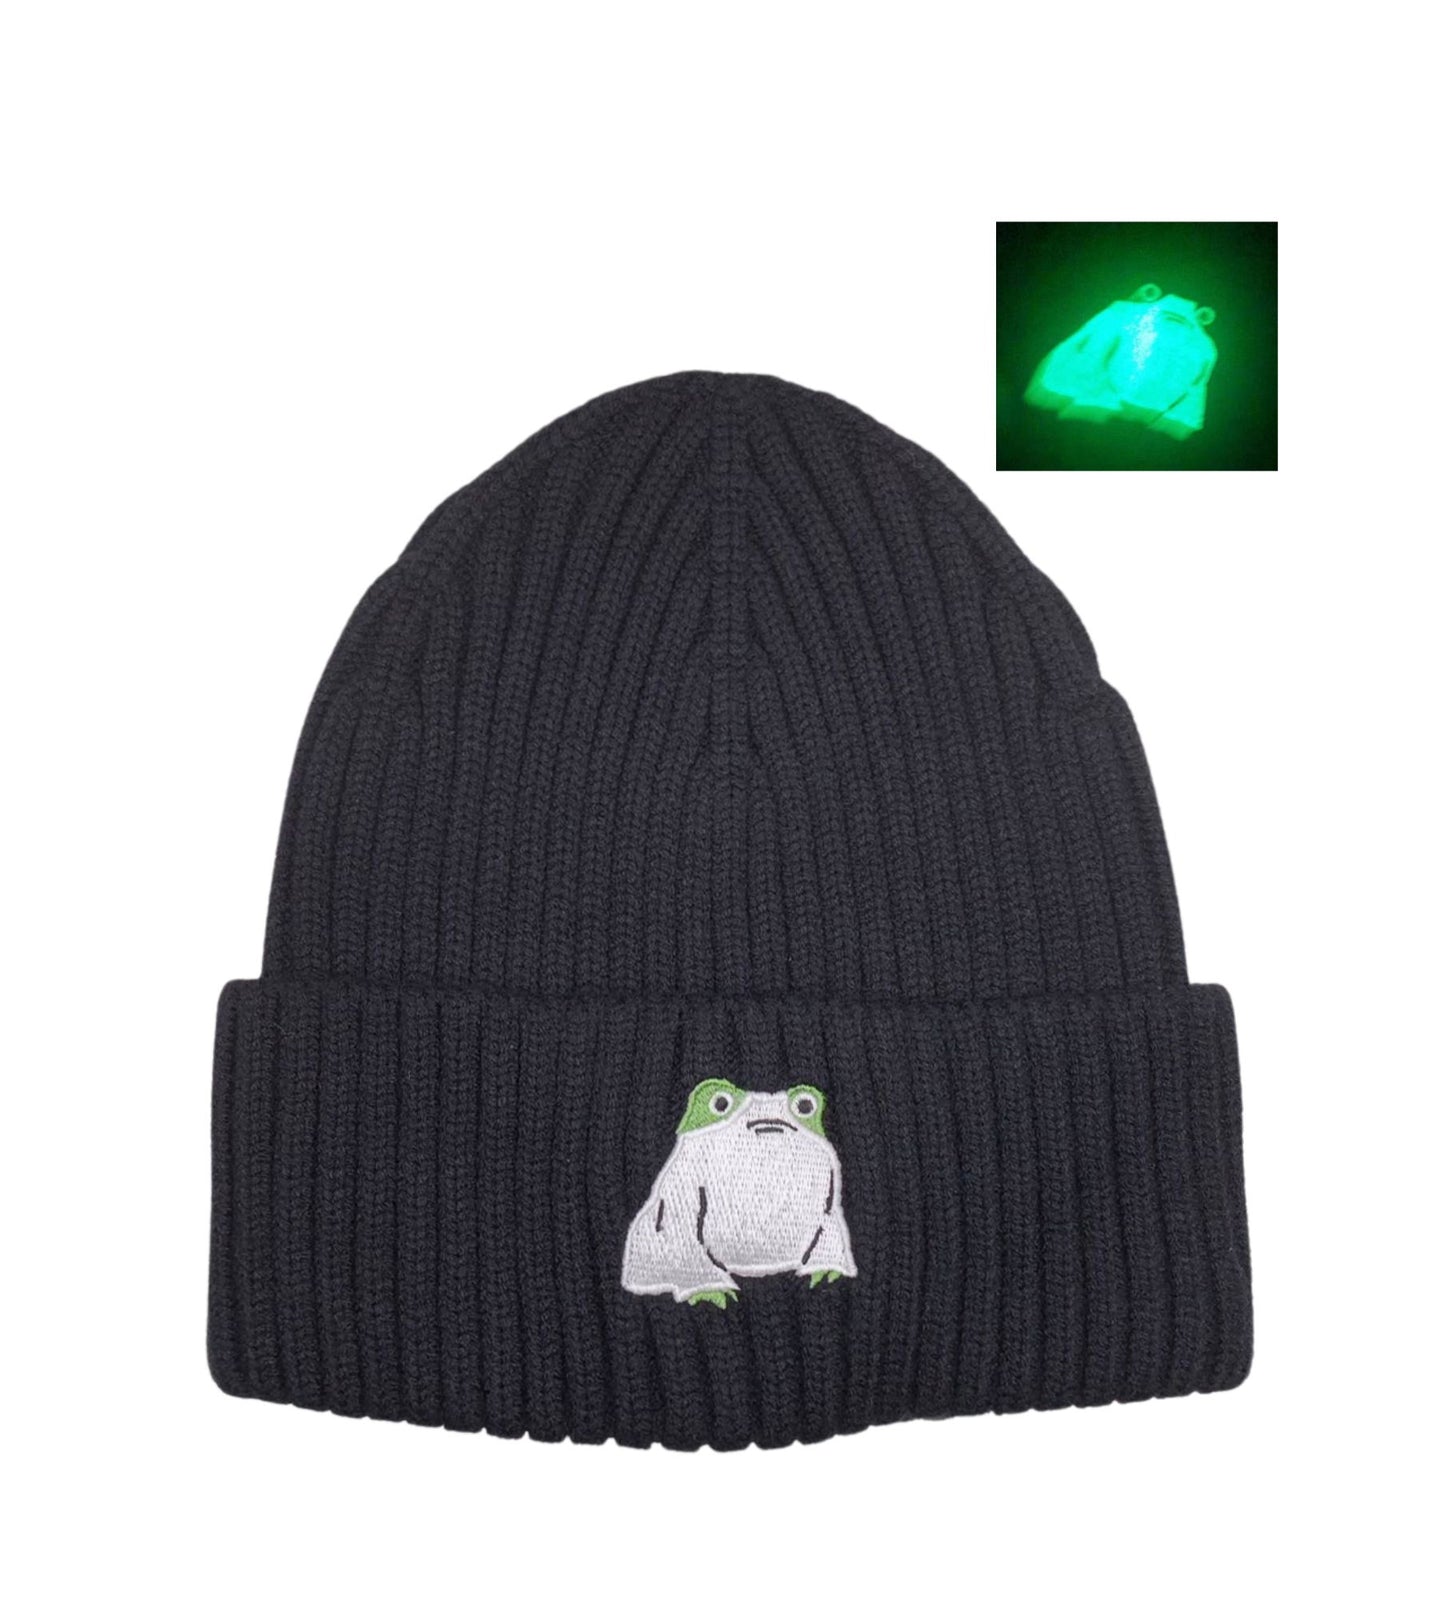 REFLECTIVE GHOST FROG BEANIE